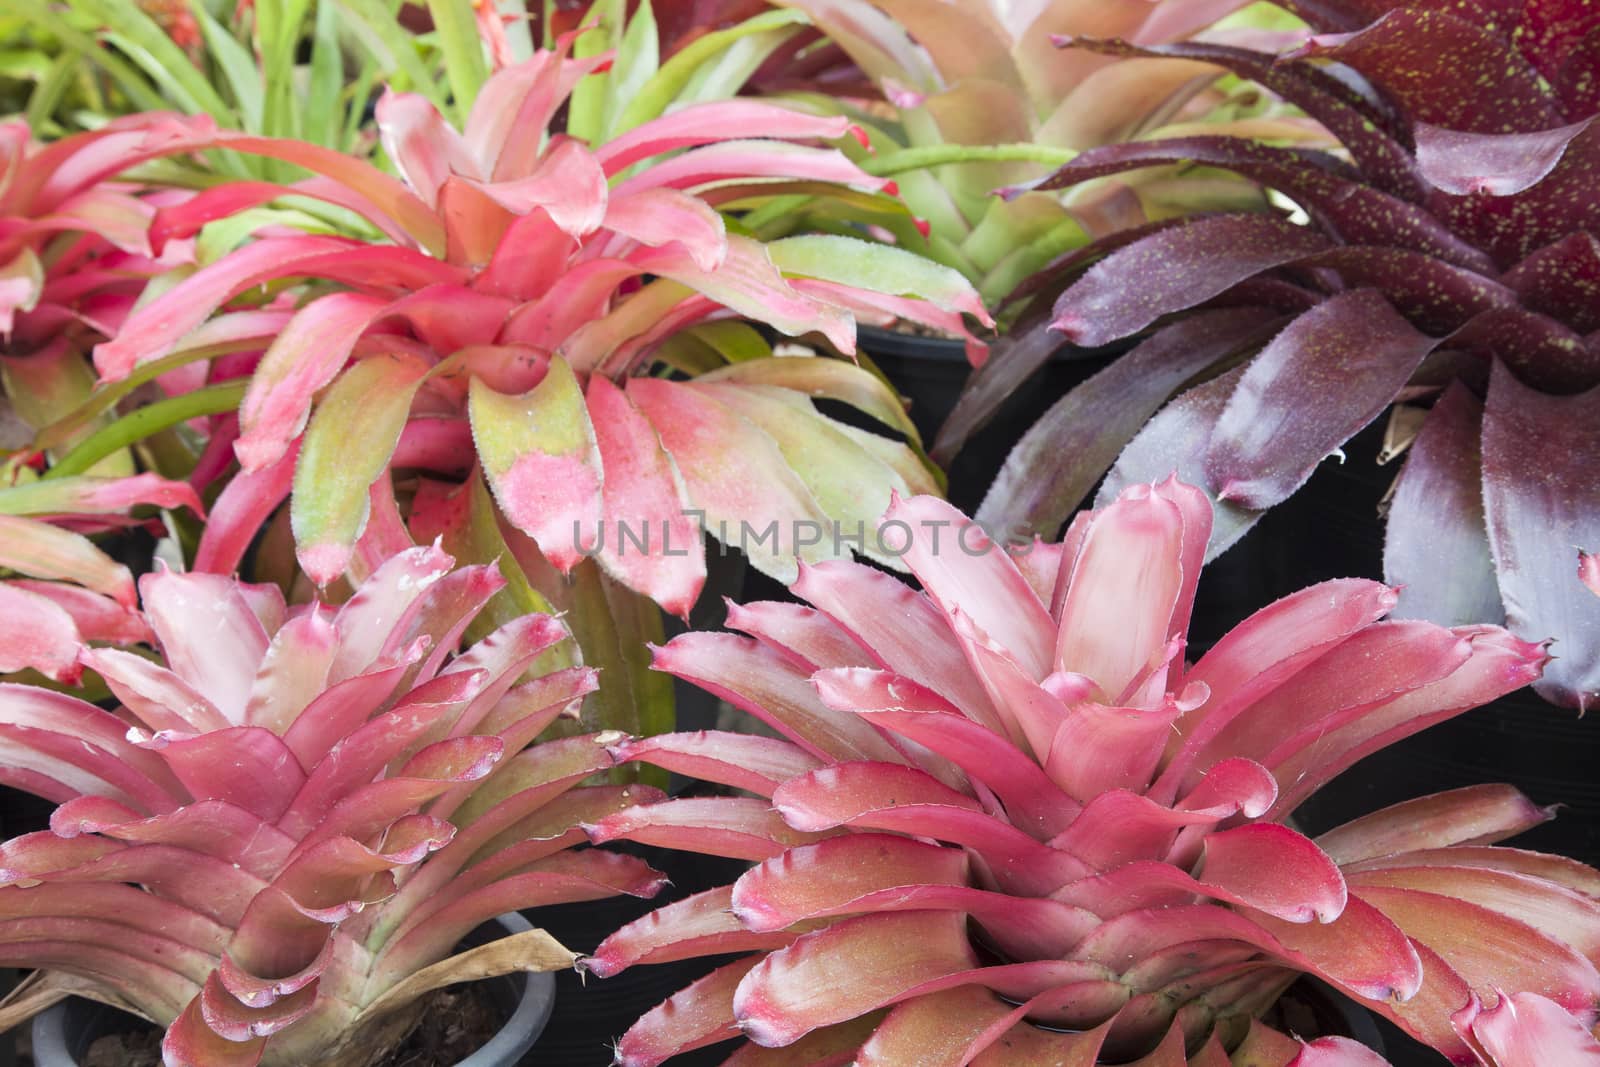 Bromeliad flower in various color in garden for postcard beauty decoration and agriculture concept design.